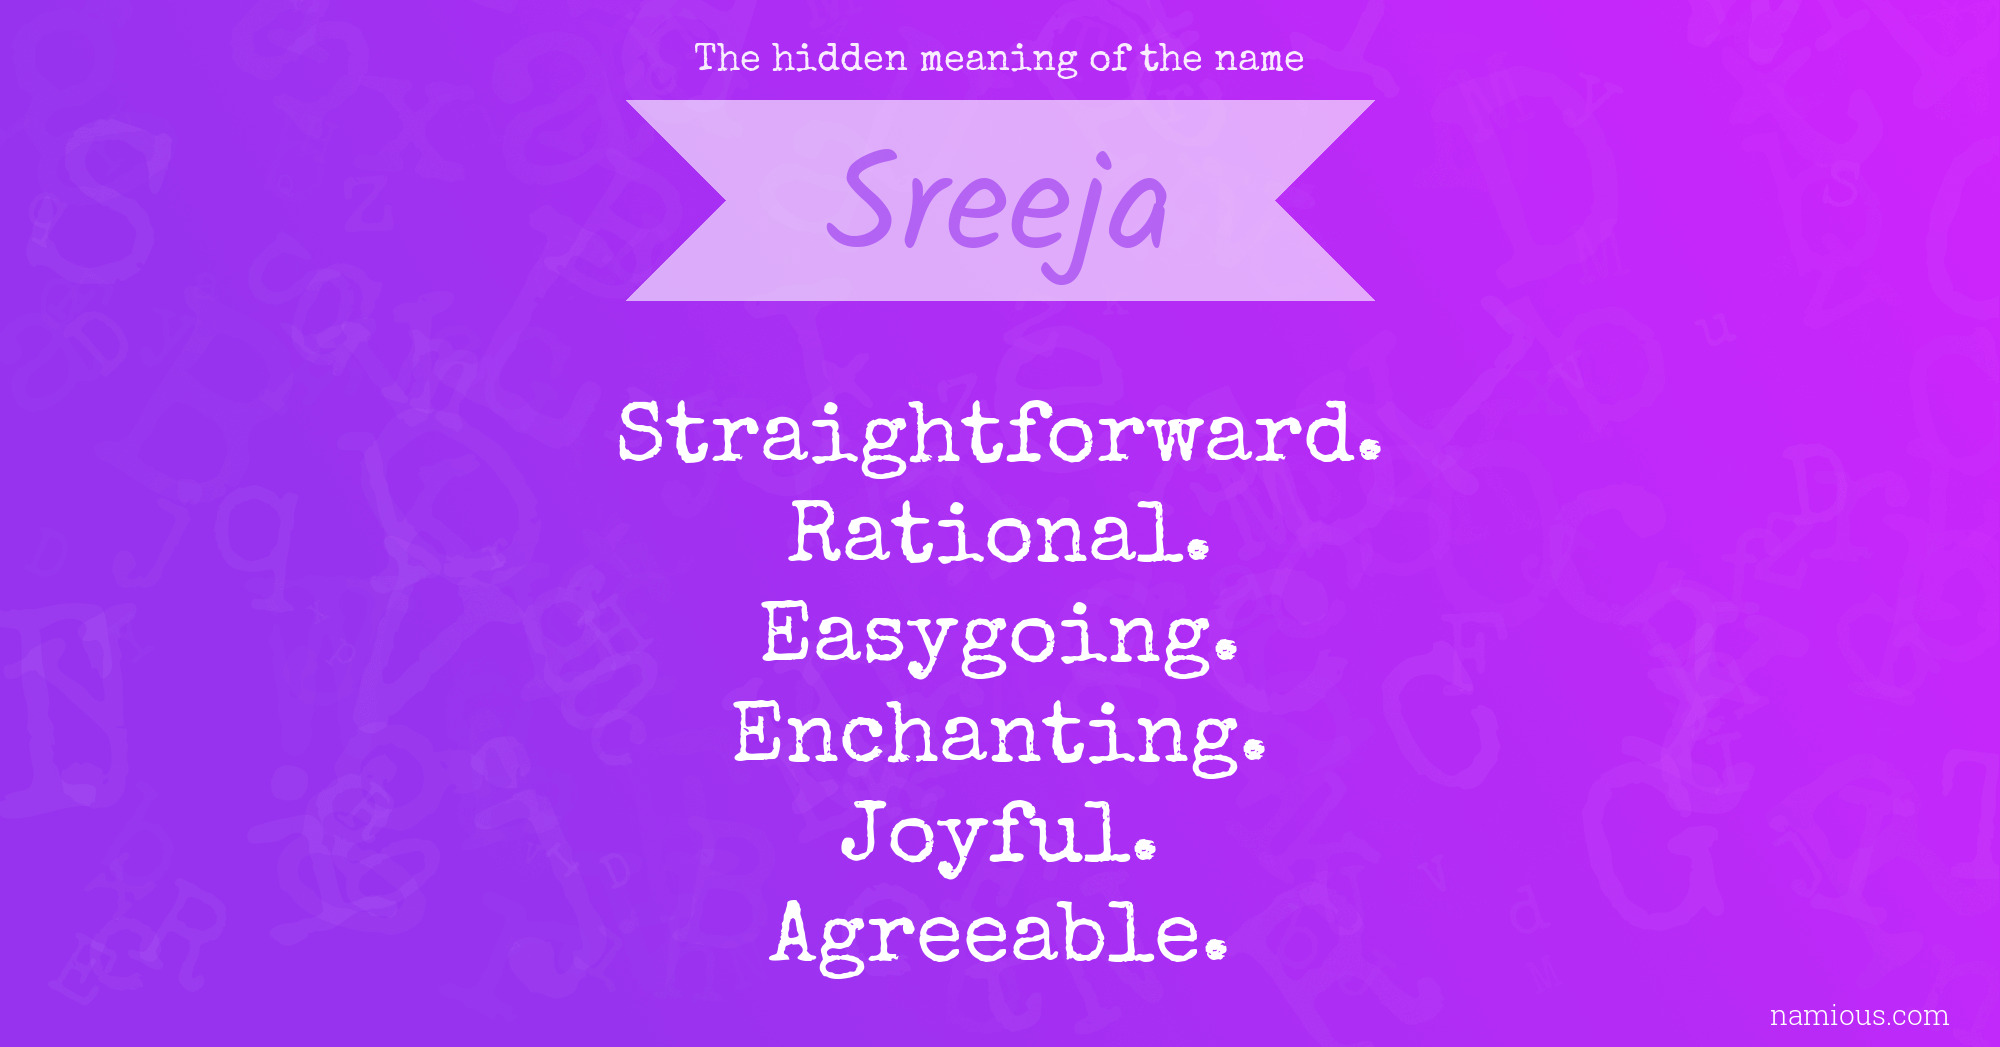 The hidden meaning of the name Sreeja